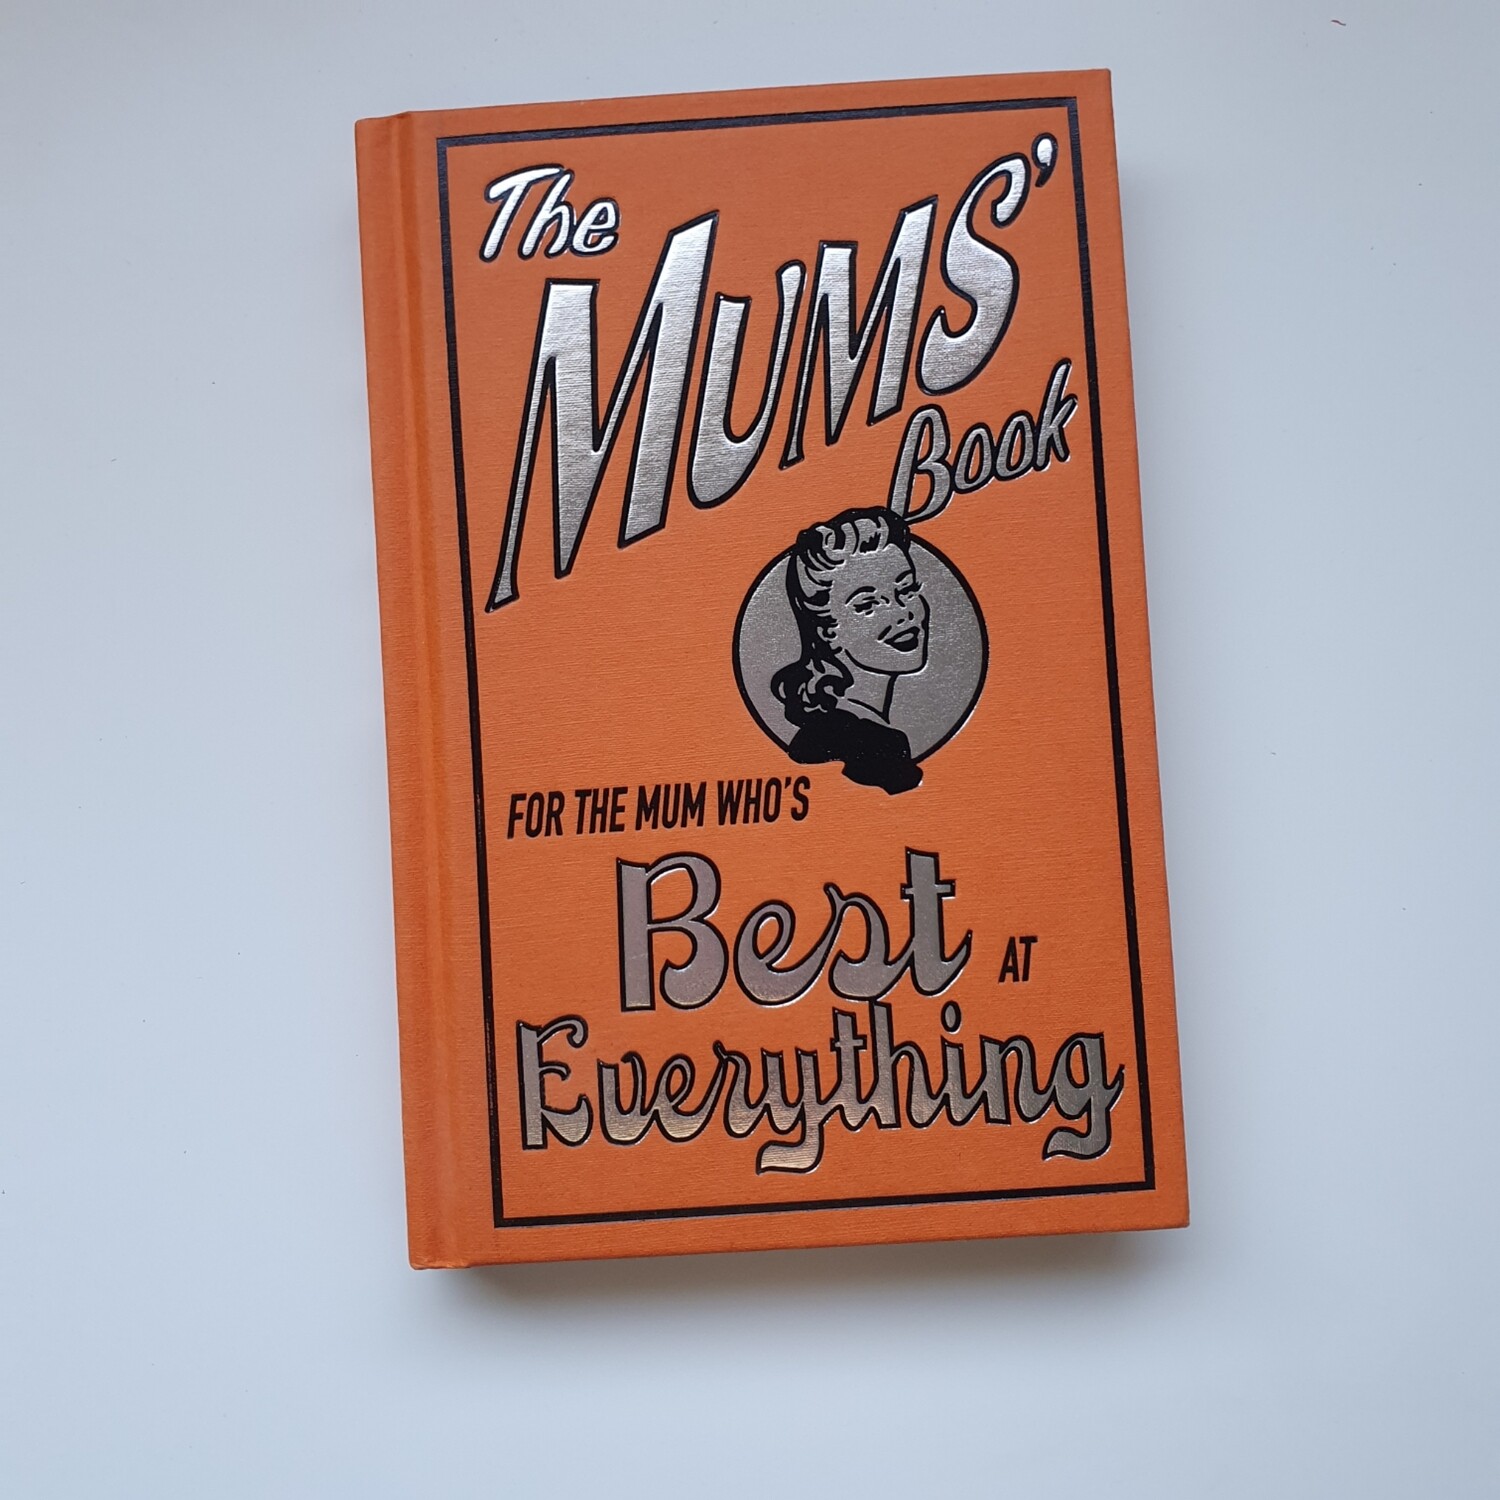 The Mum's Book -  who is best at Everything